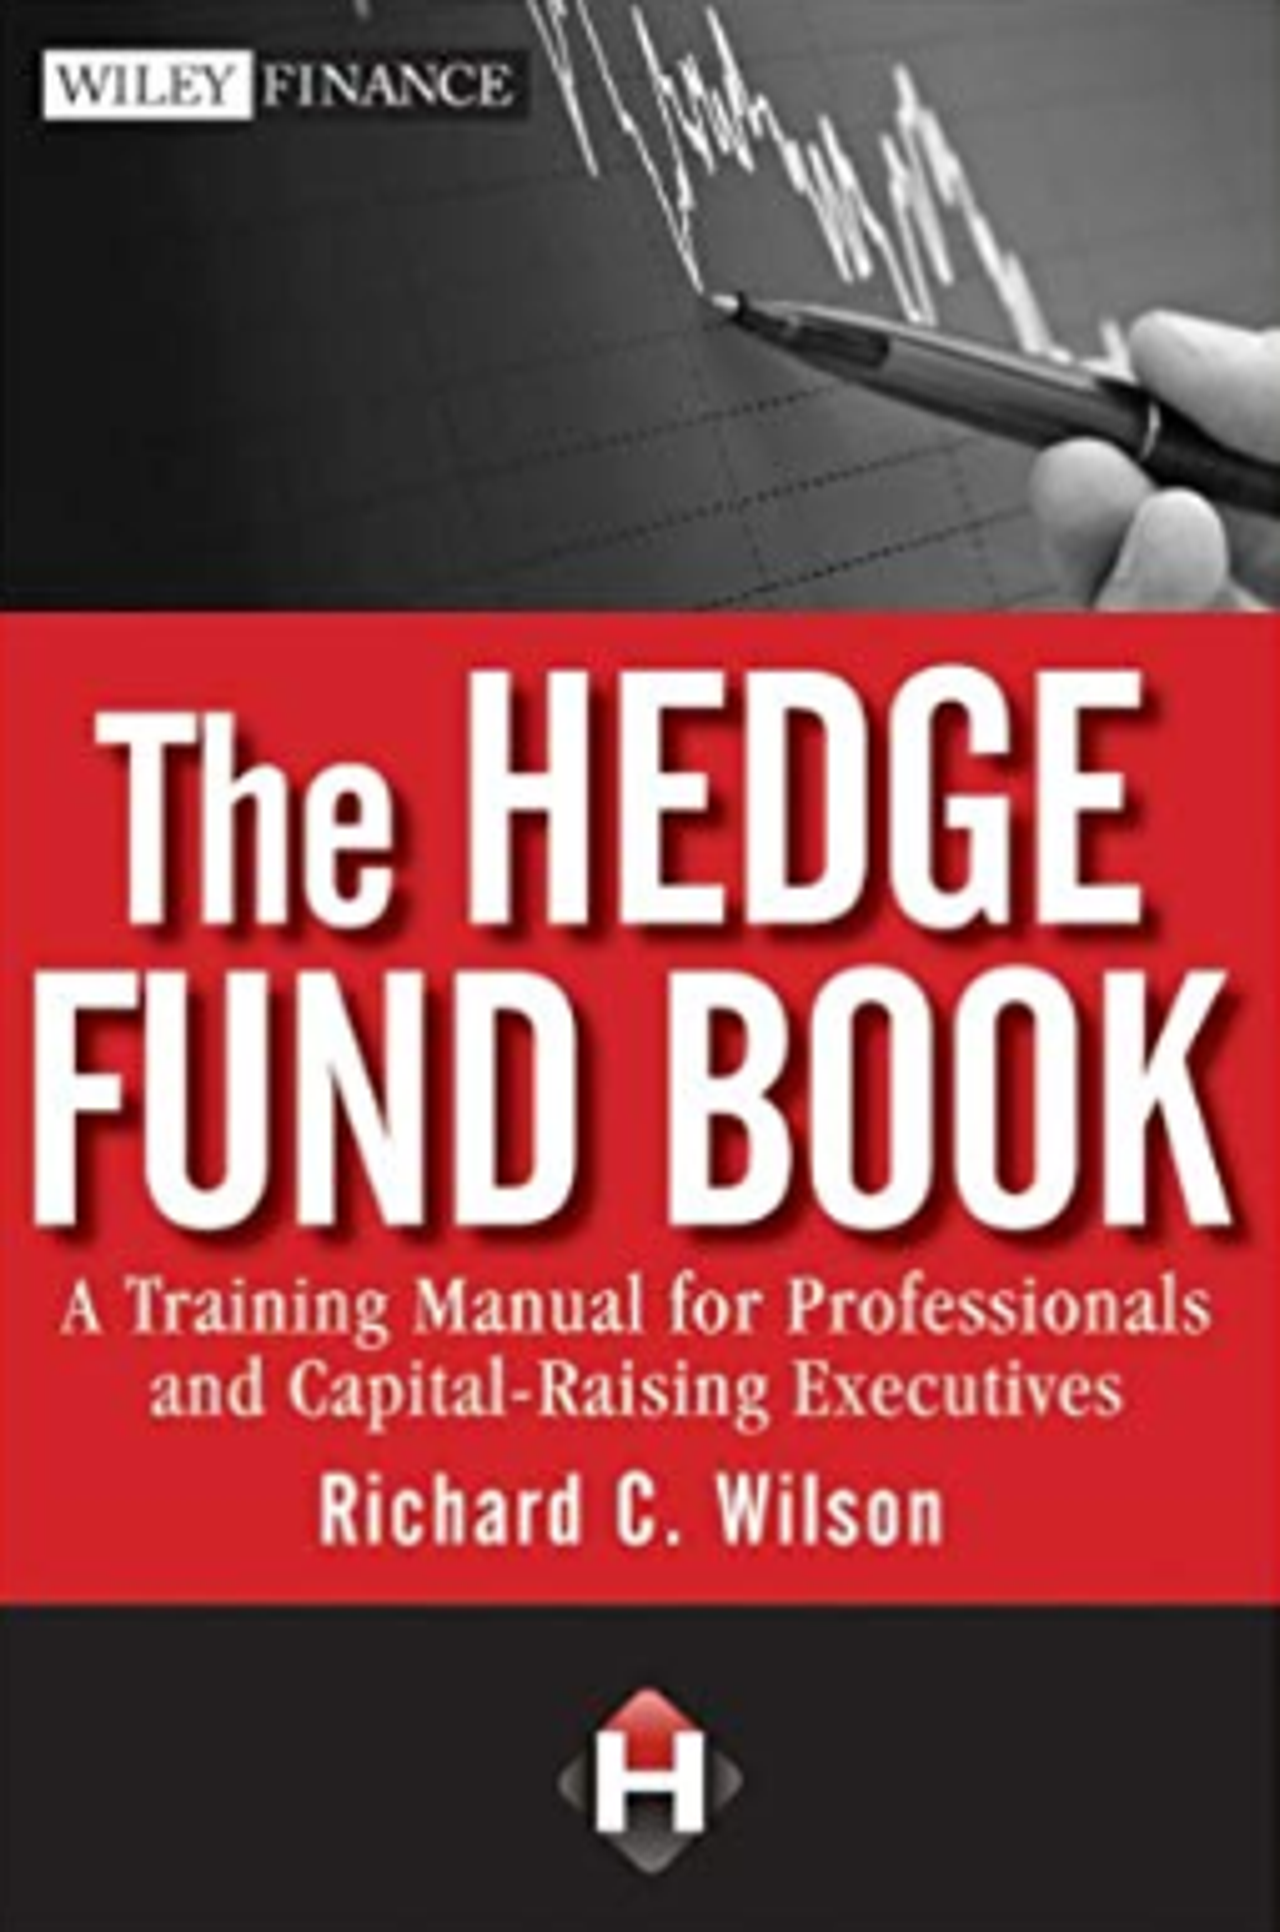 Buy The Hedge Fund Book on Amazon